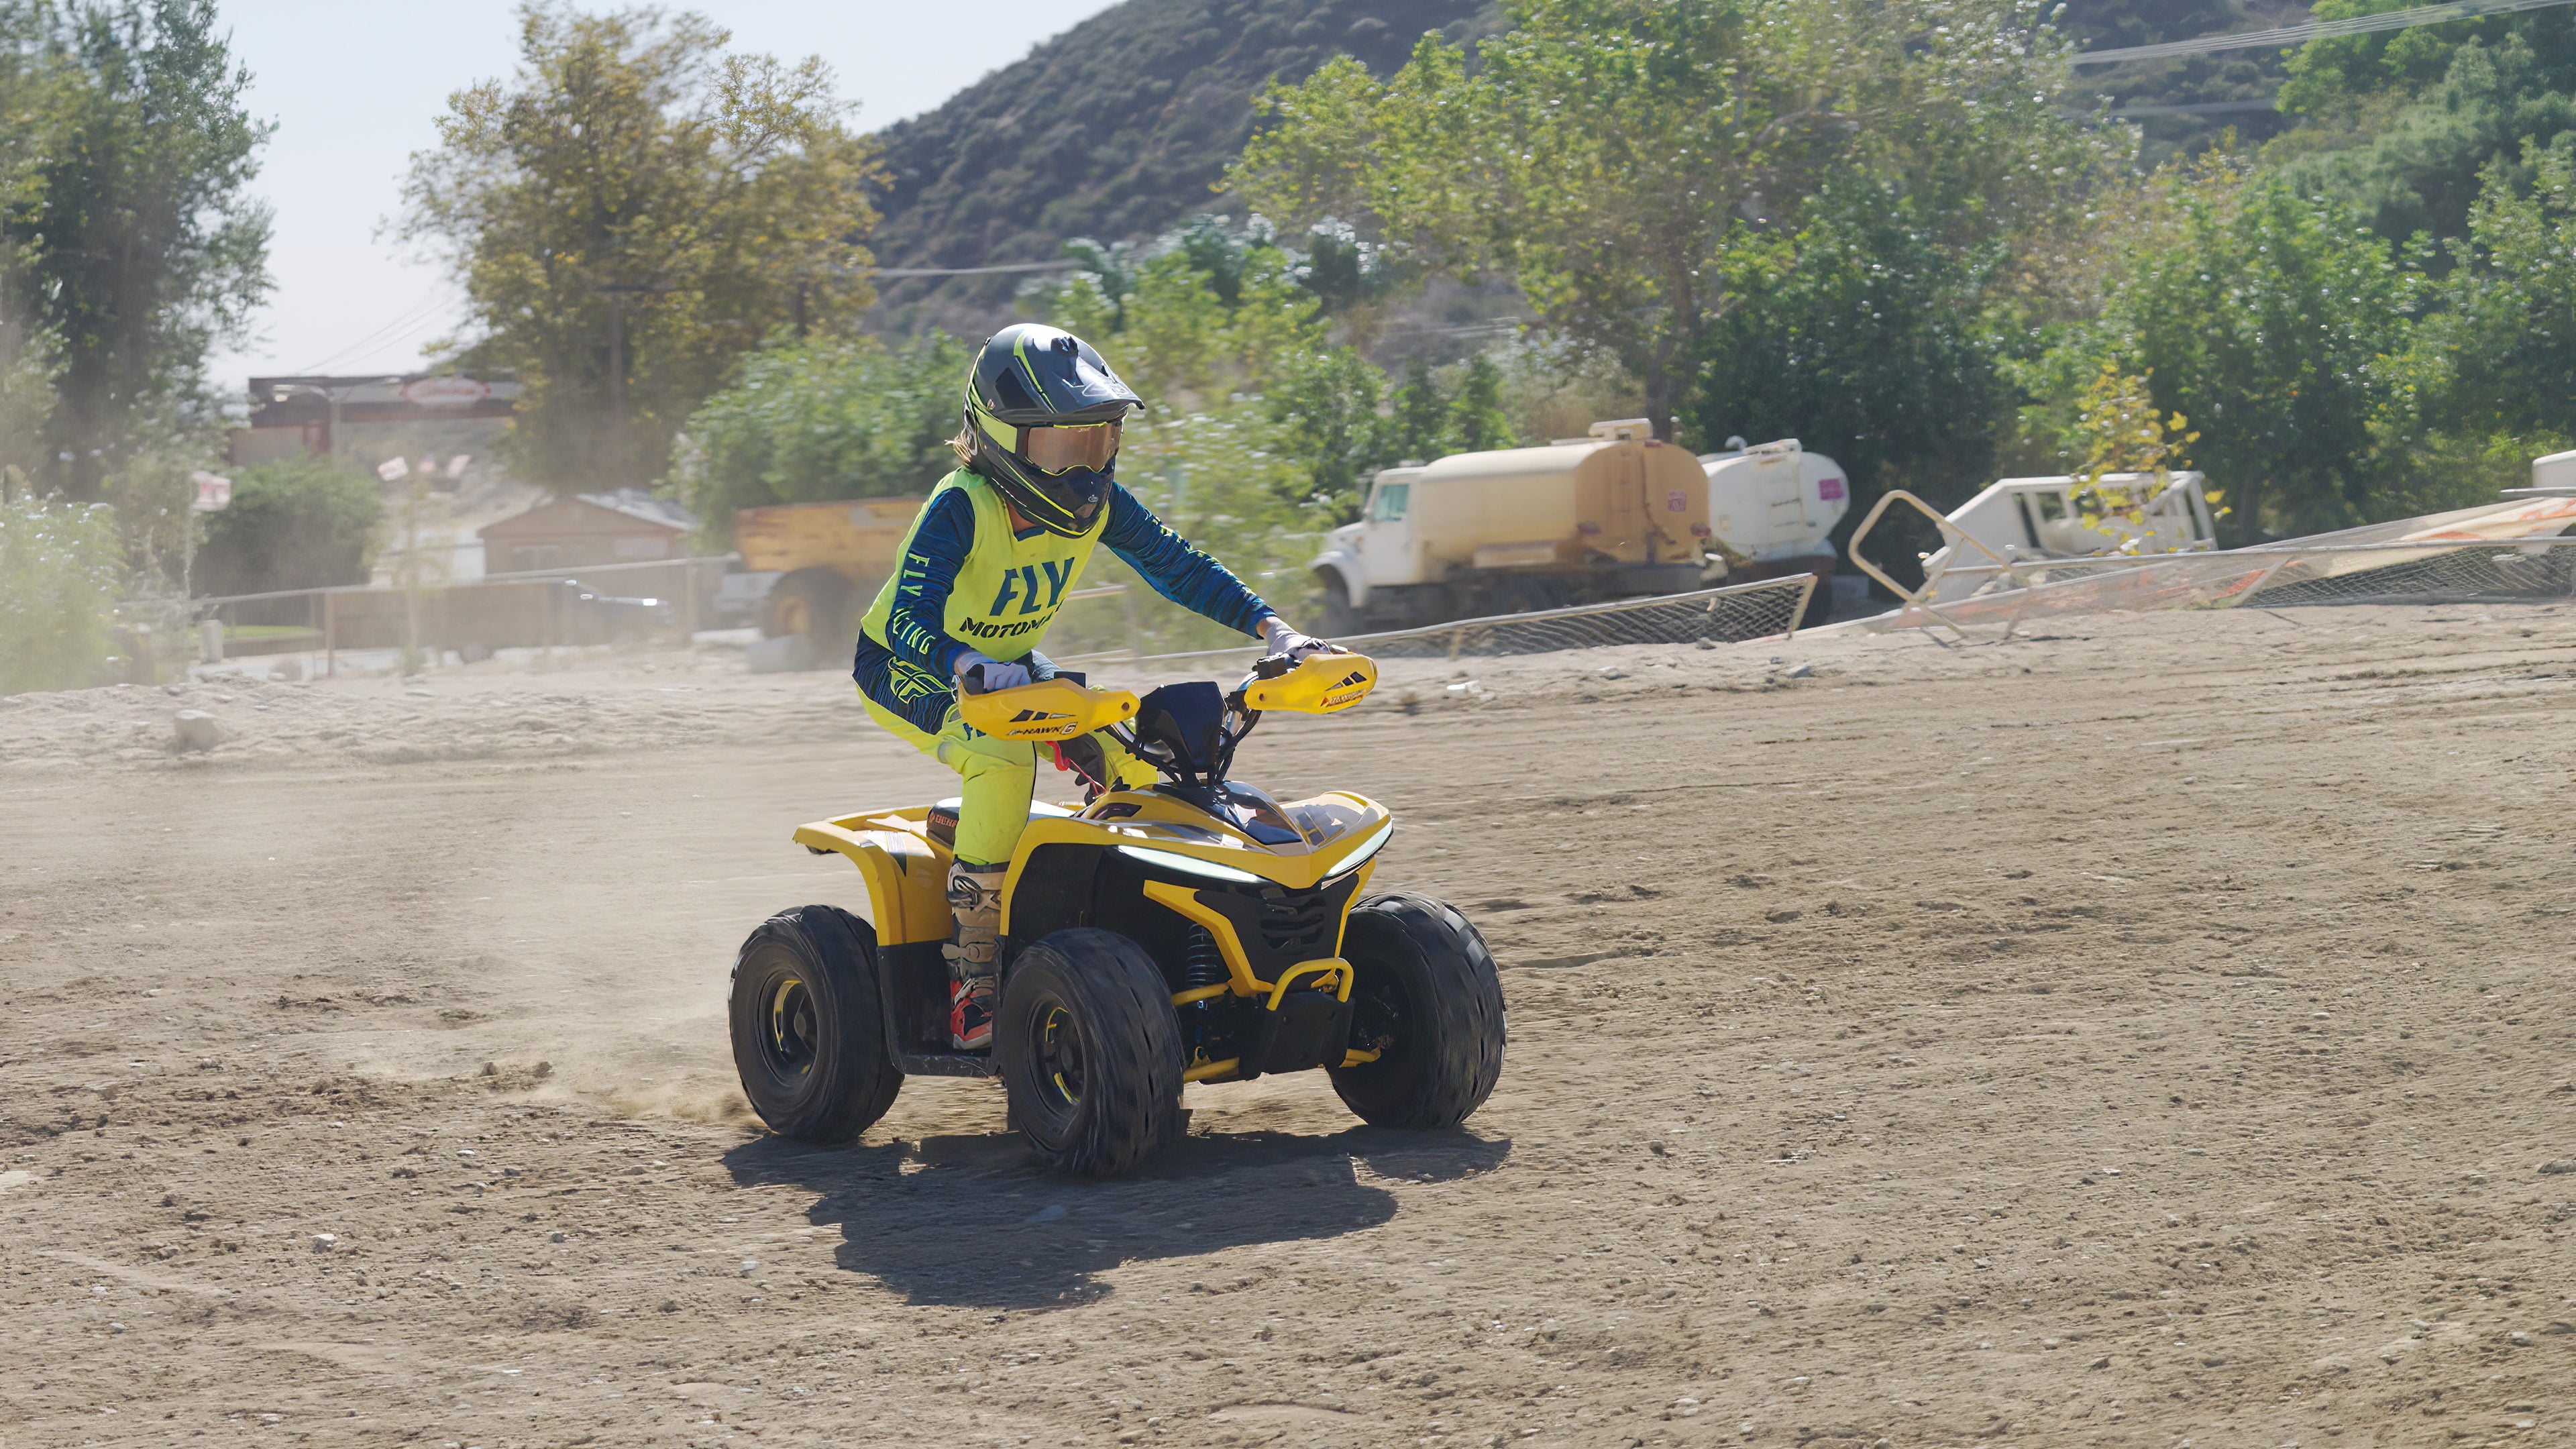 What To Look For When Buying Your First ATV